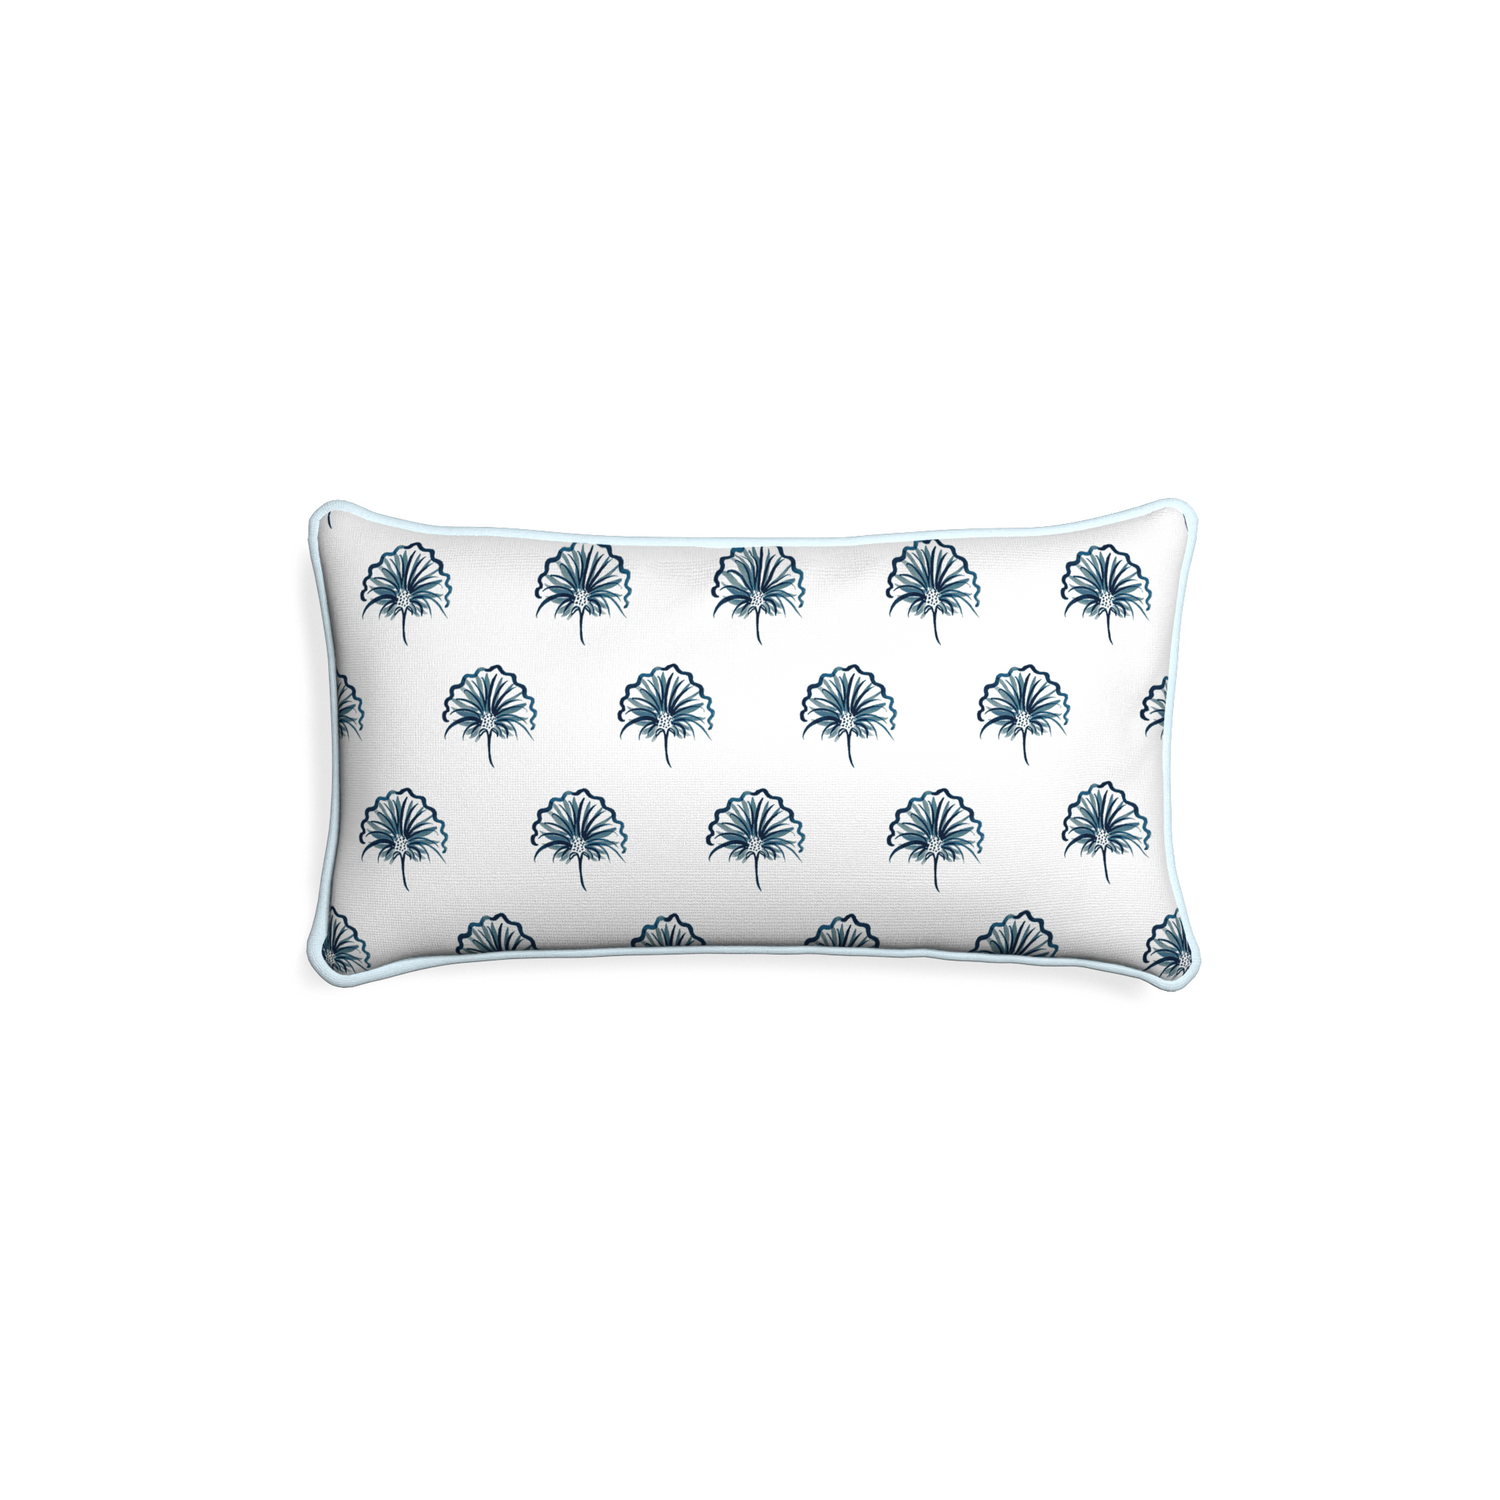 Petite-lumbar penelope midnight custom floral navypillow with powder piping on white background